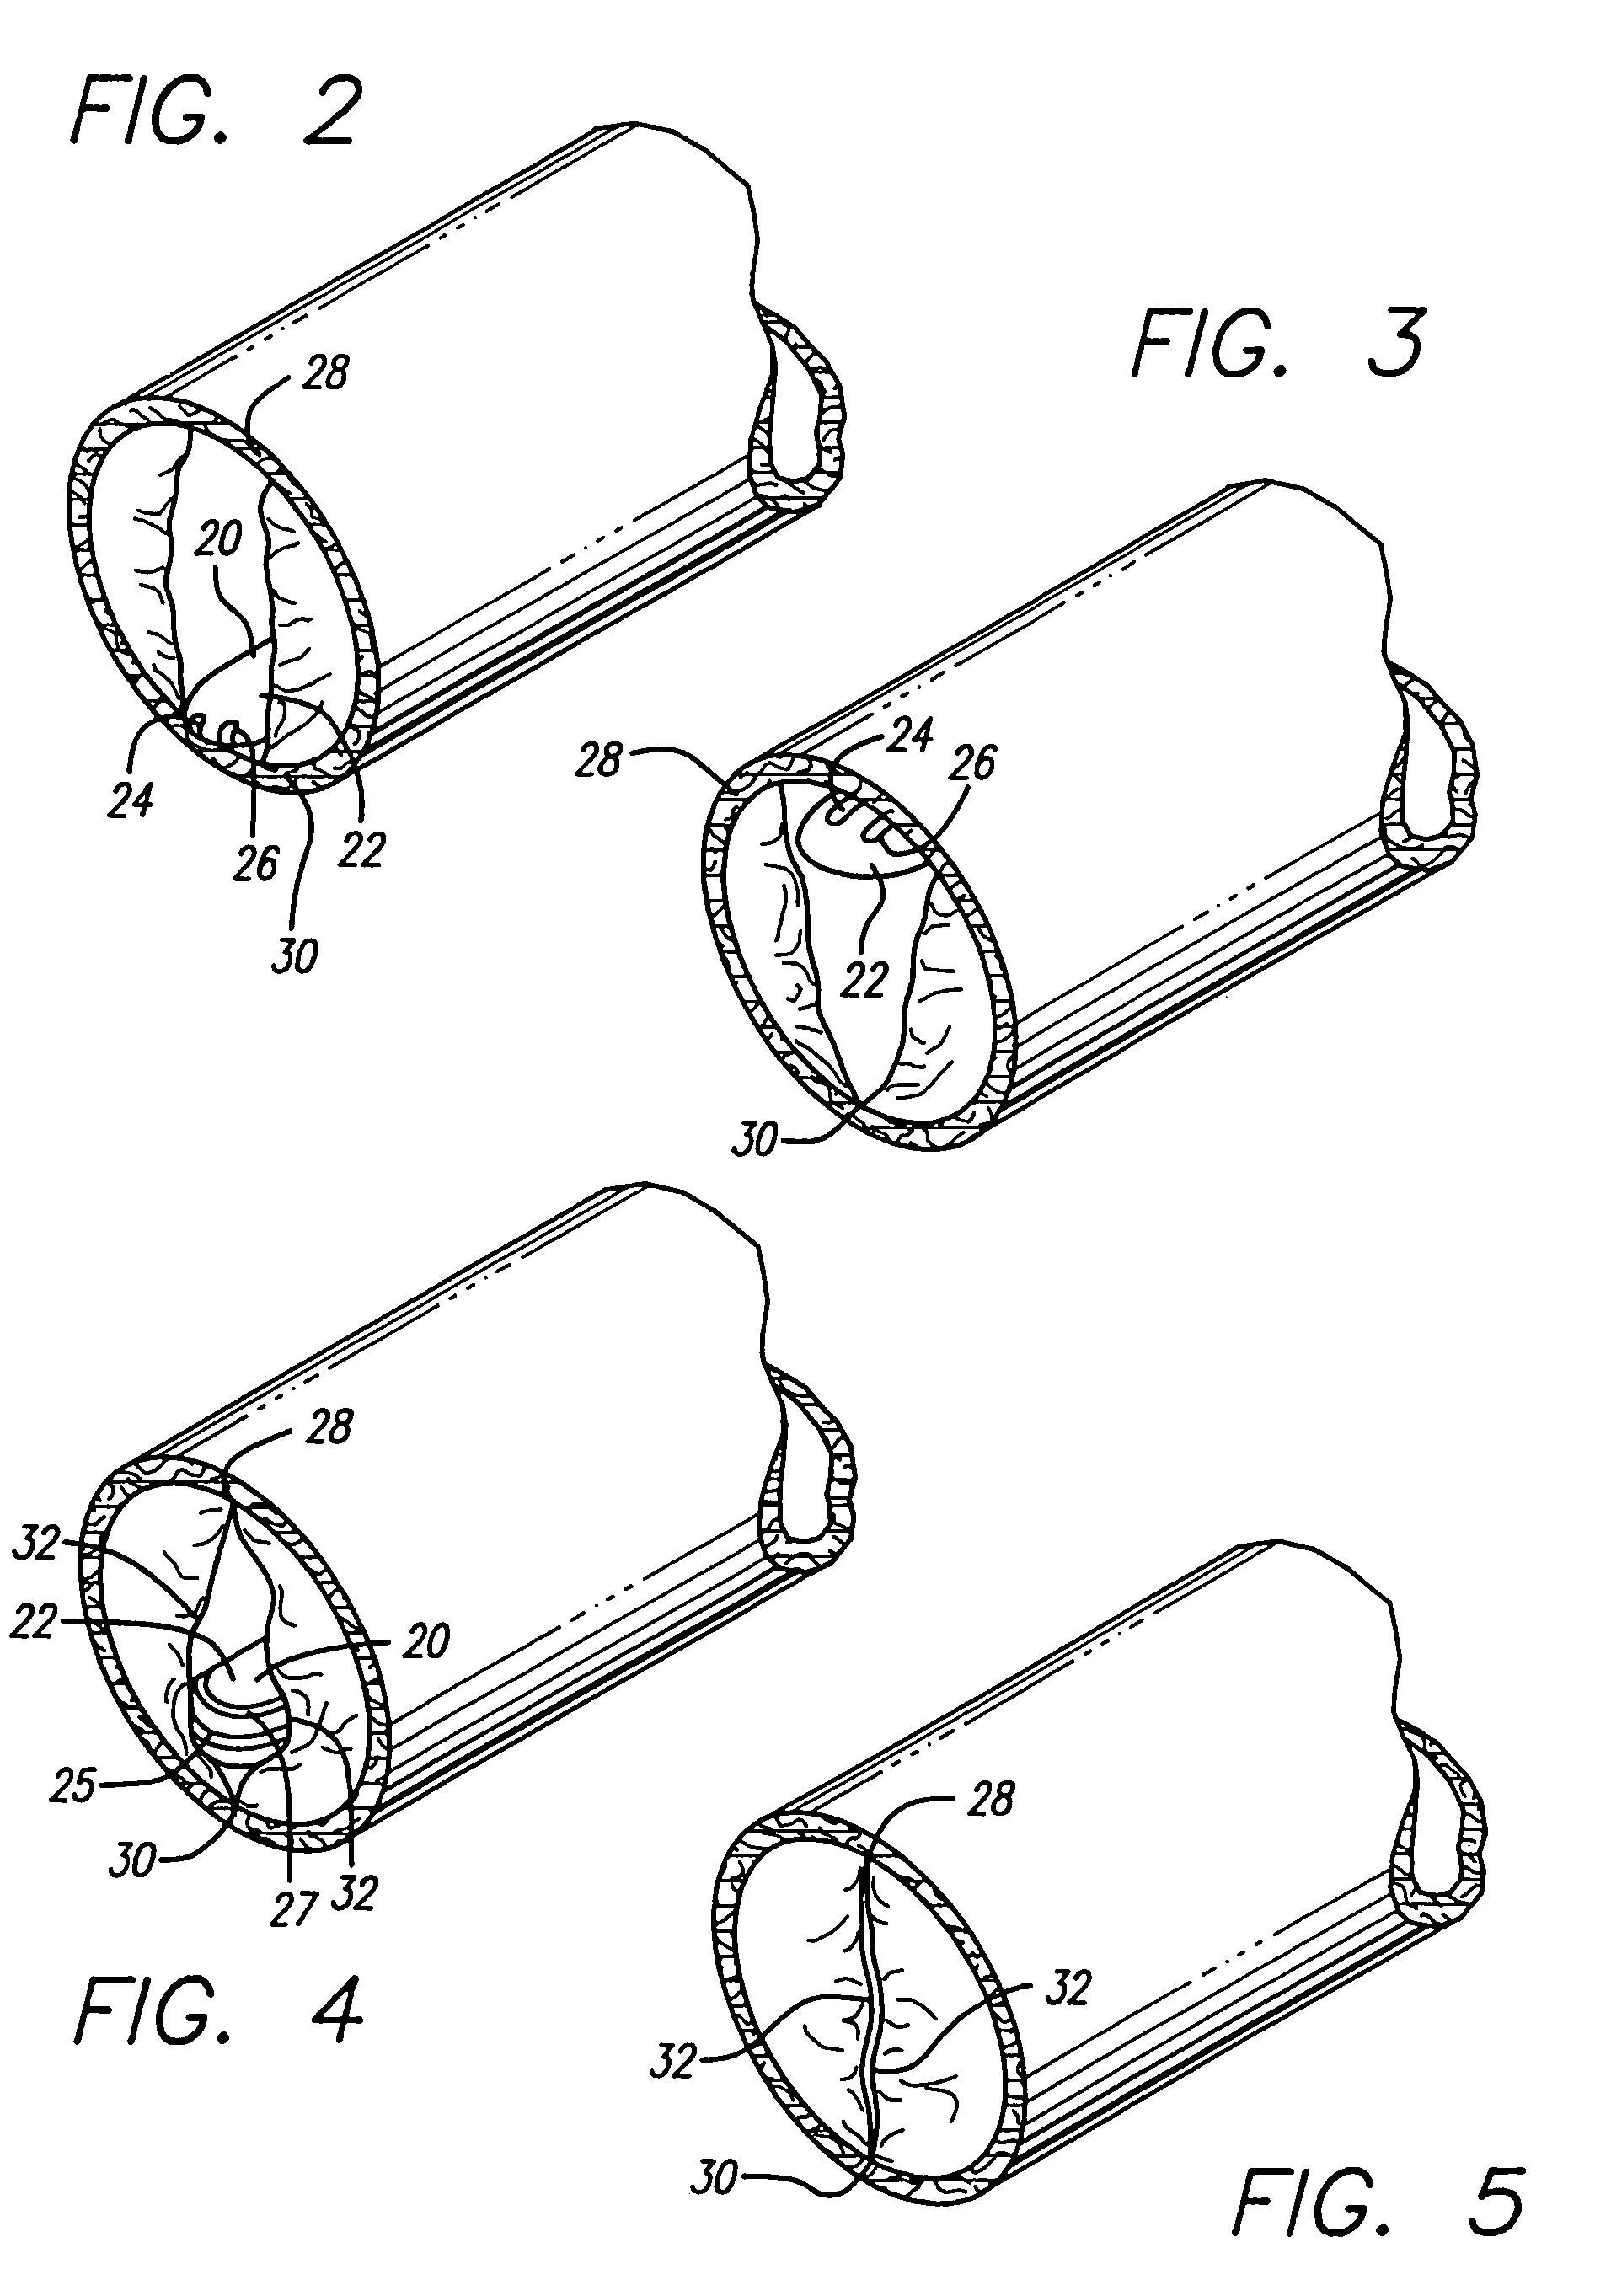 Apparatus for treating venous insufficiency using directionally applied energy